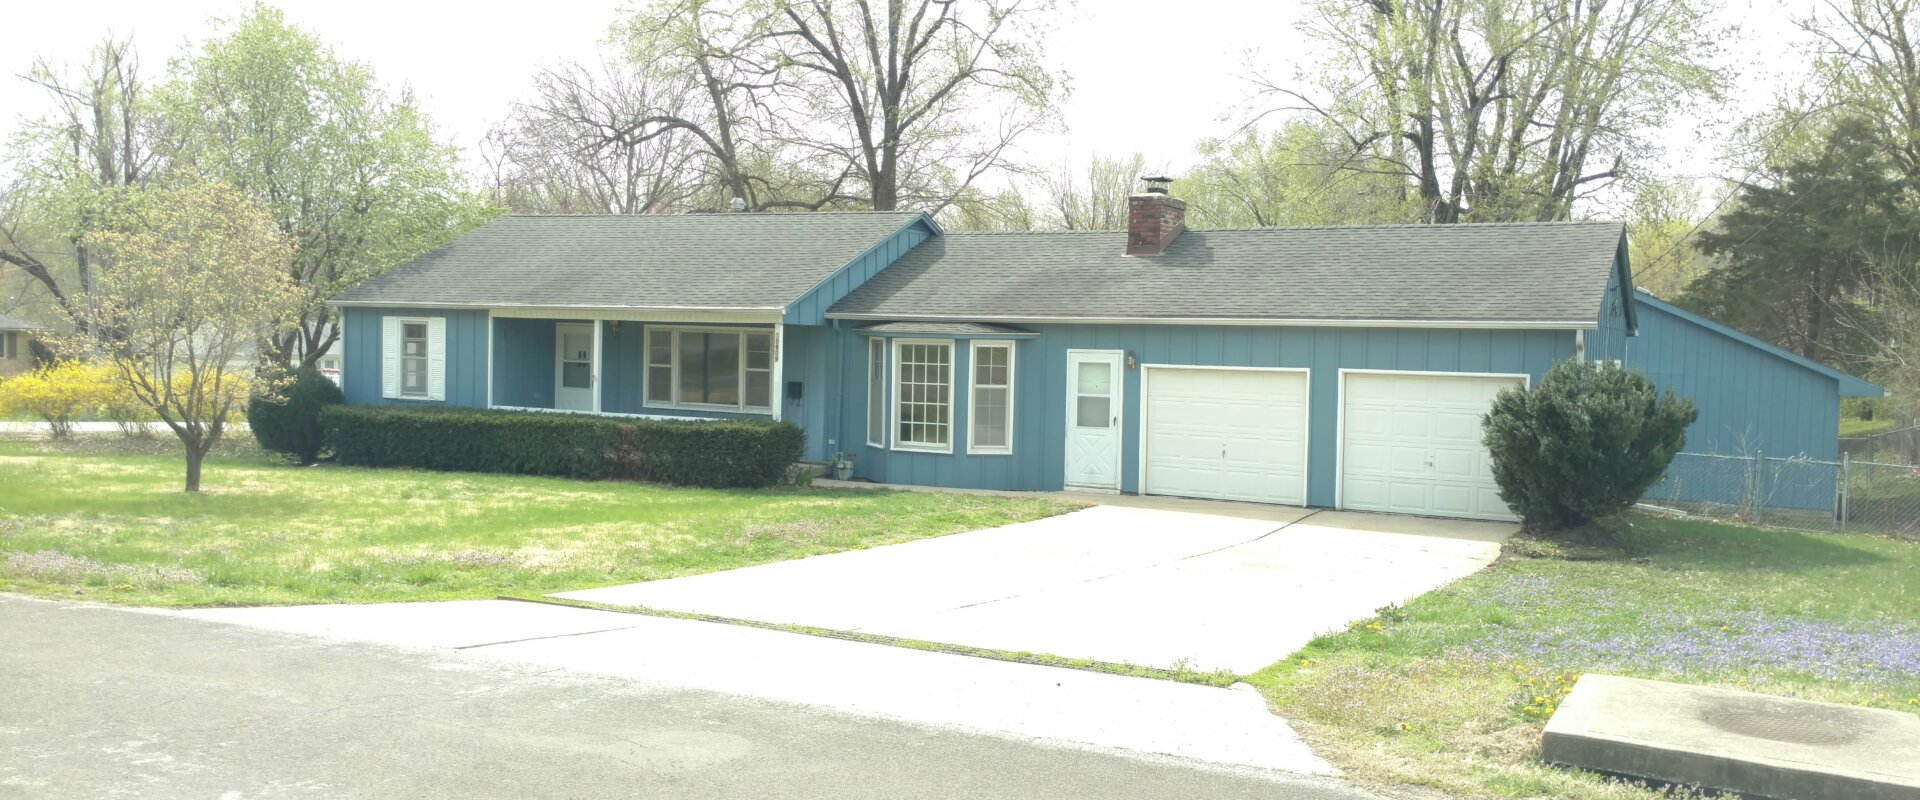 Blue house in raytown with 2 car garage